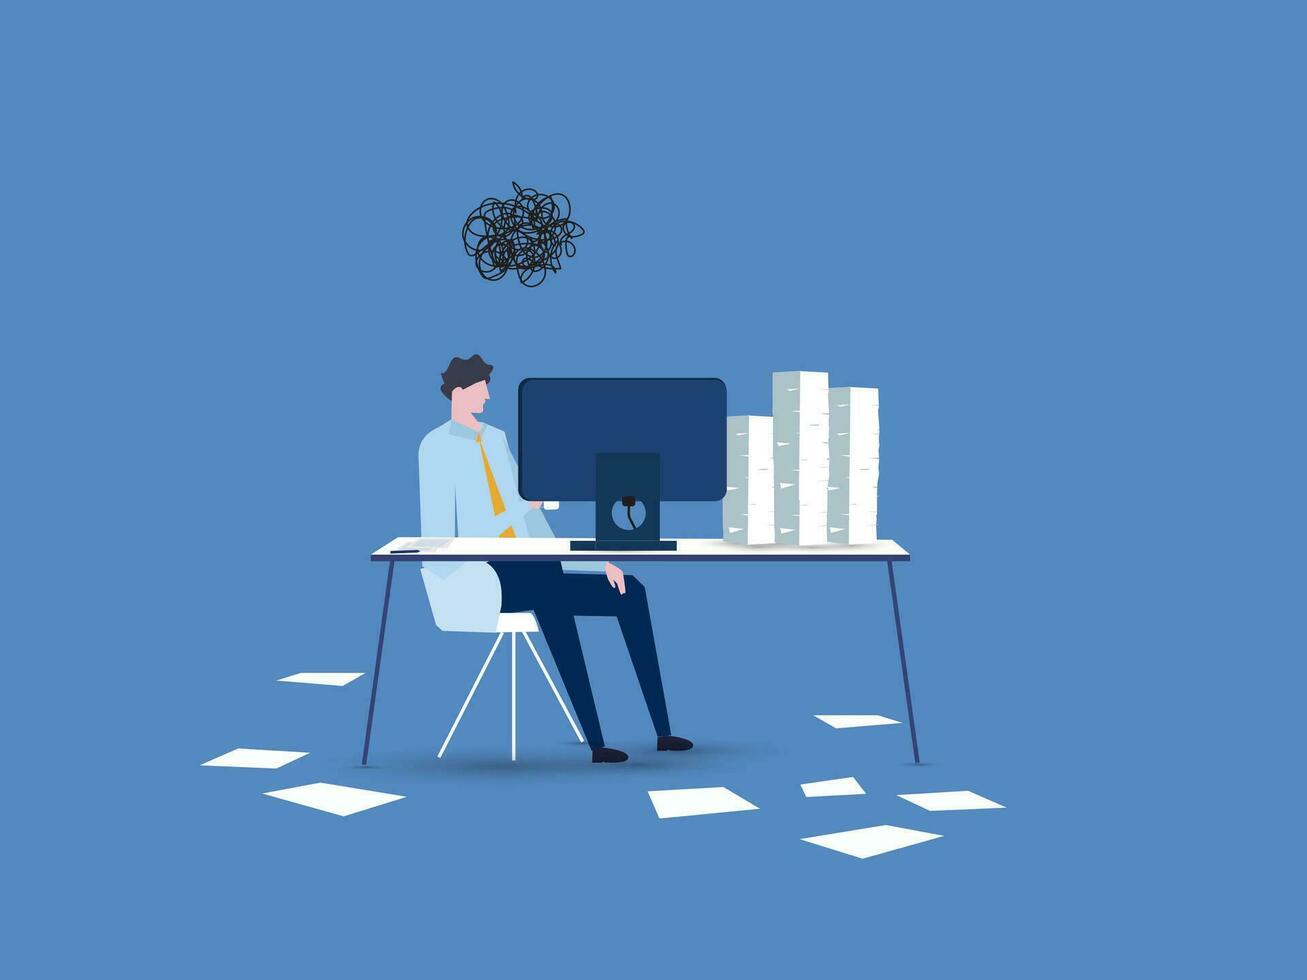 frustrated businessman sitting on office busy desk.Overwhelmed, work stress, tired or fatigue from overworked, busy to finish project paperwork in deadline, anxiety or exhaustion, headache concept. vector